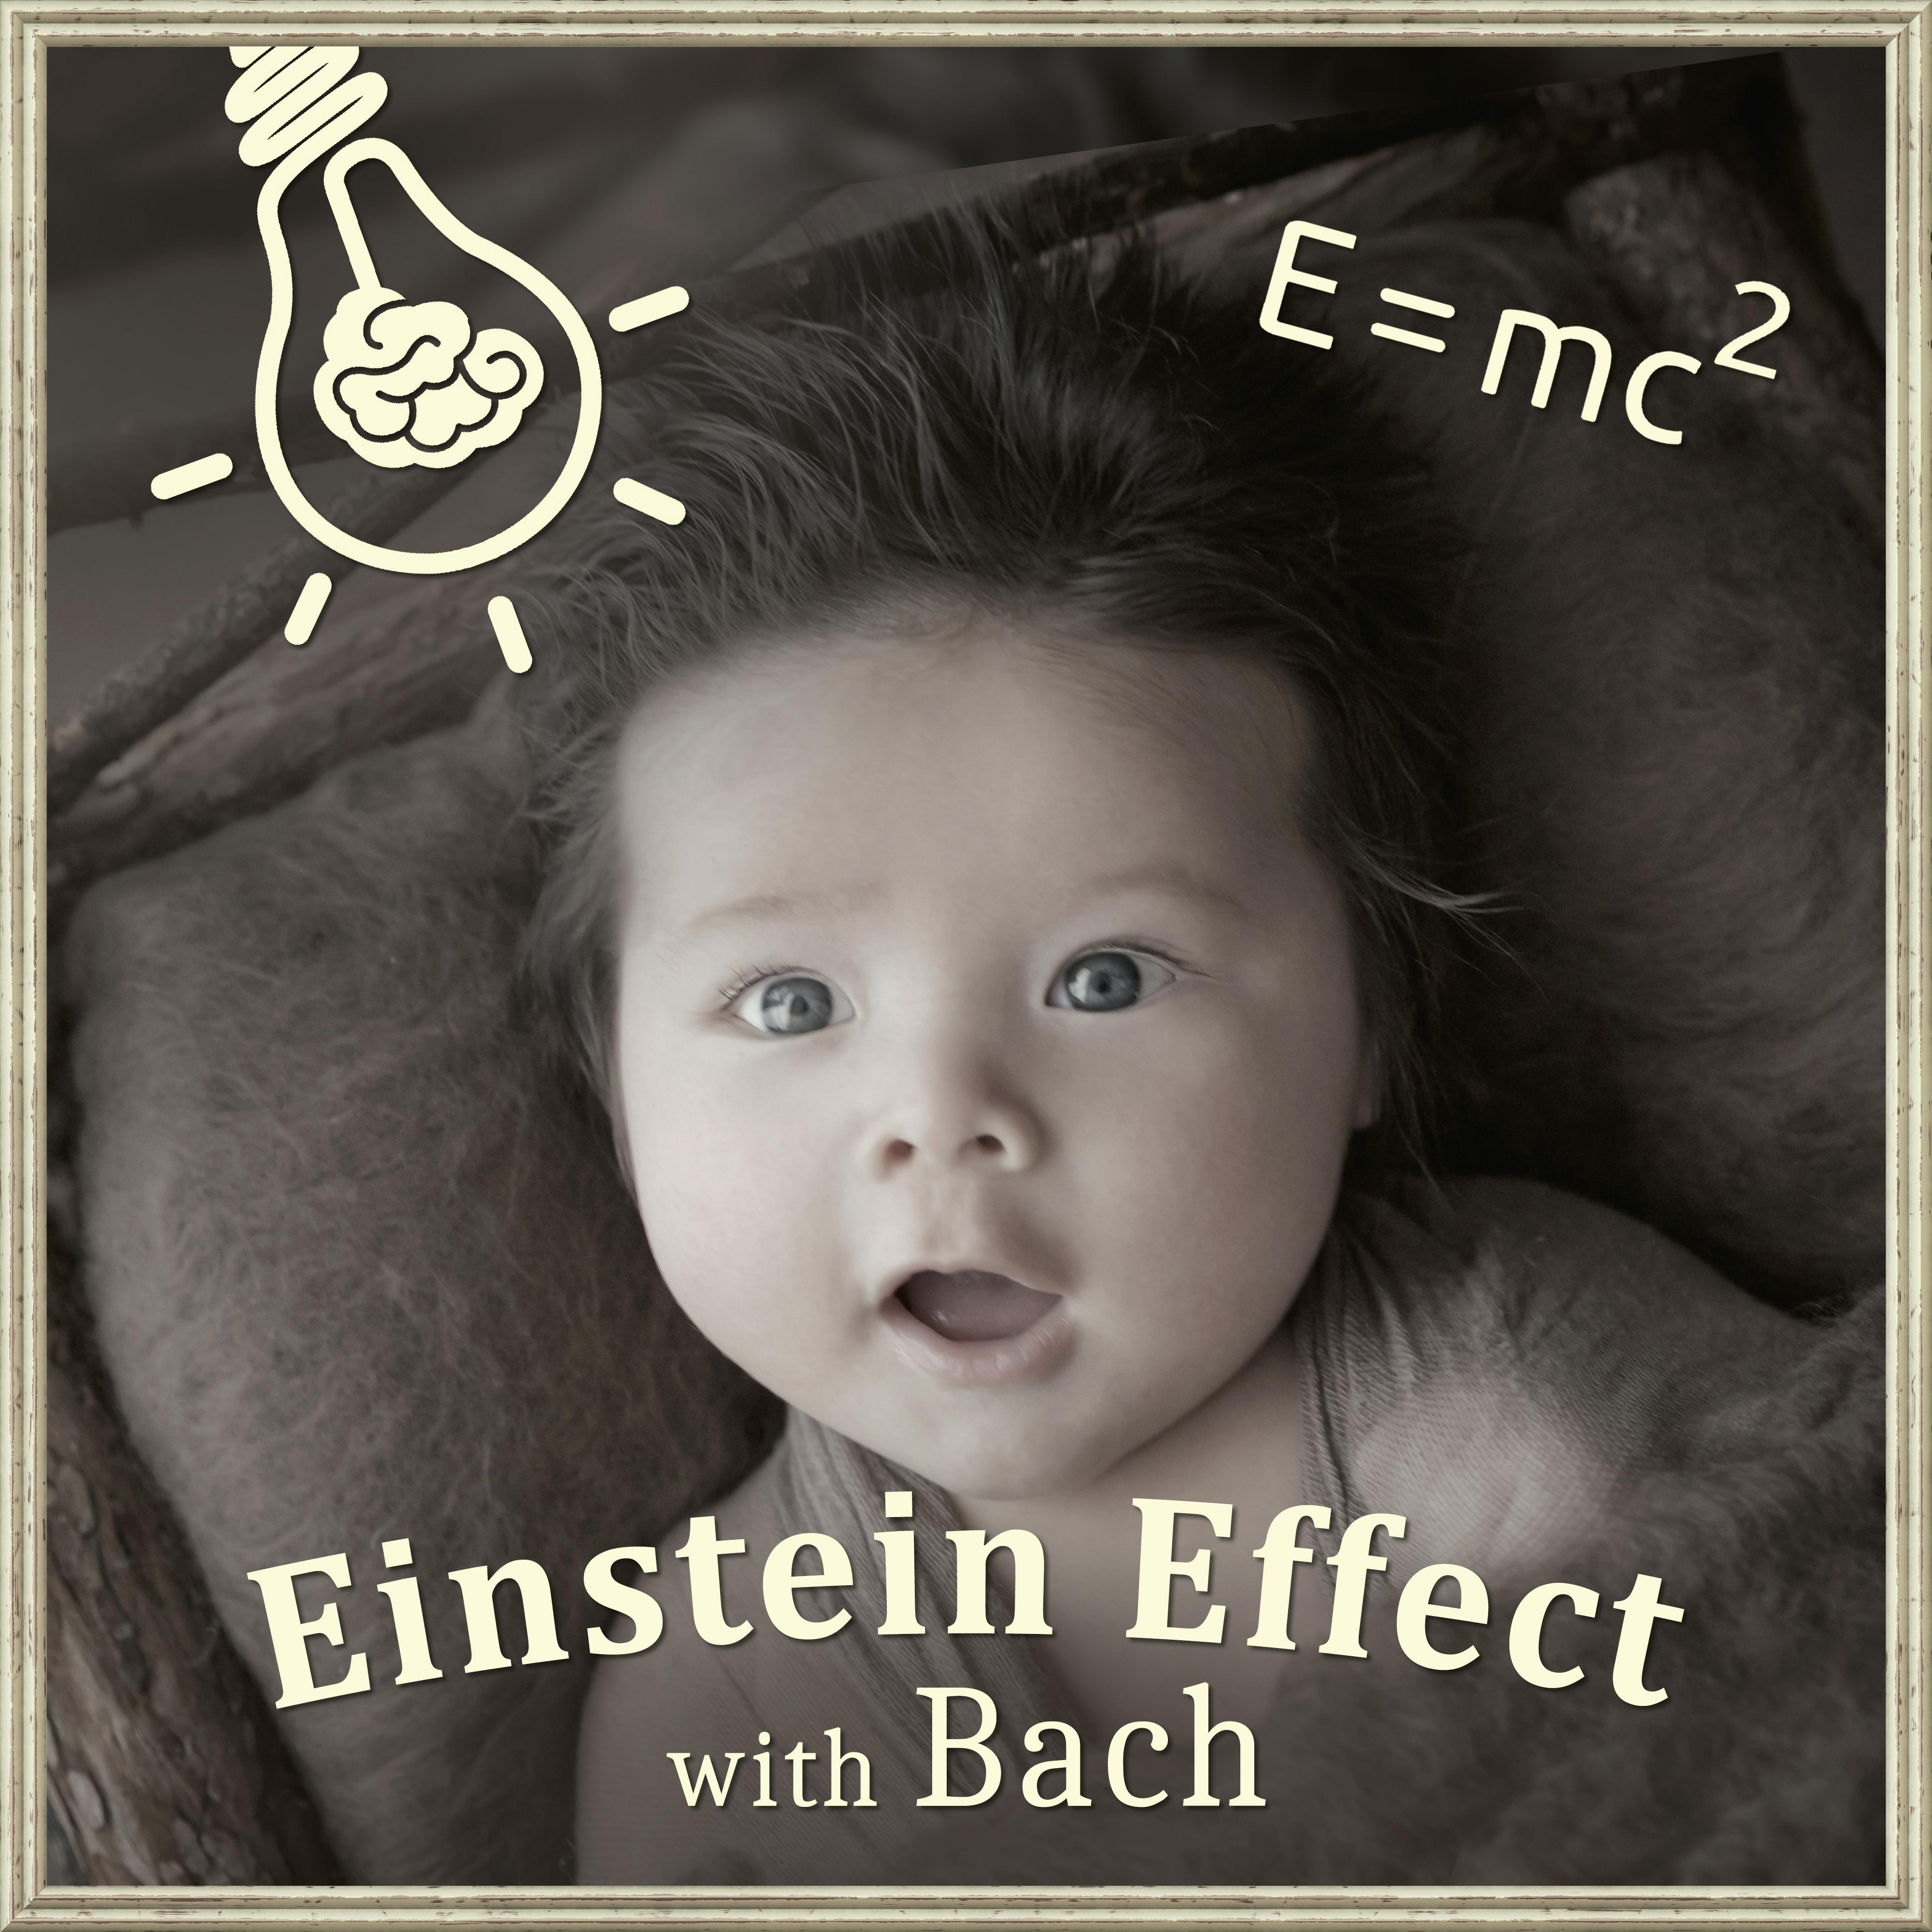 Einstein Effect with Bach  Brilliant Music for Baby, The Best Classical Songs for Listening, Exercise Mind Baby, Music Fun